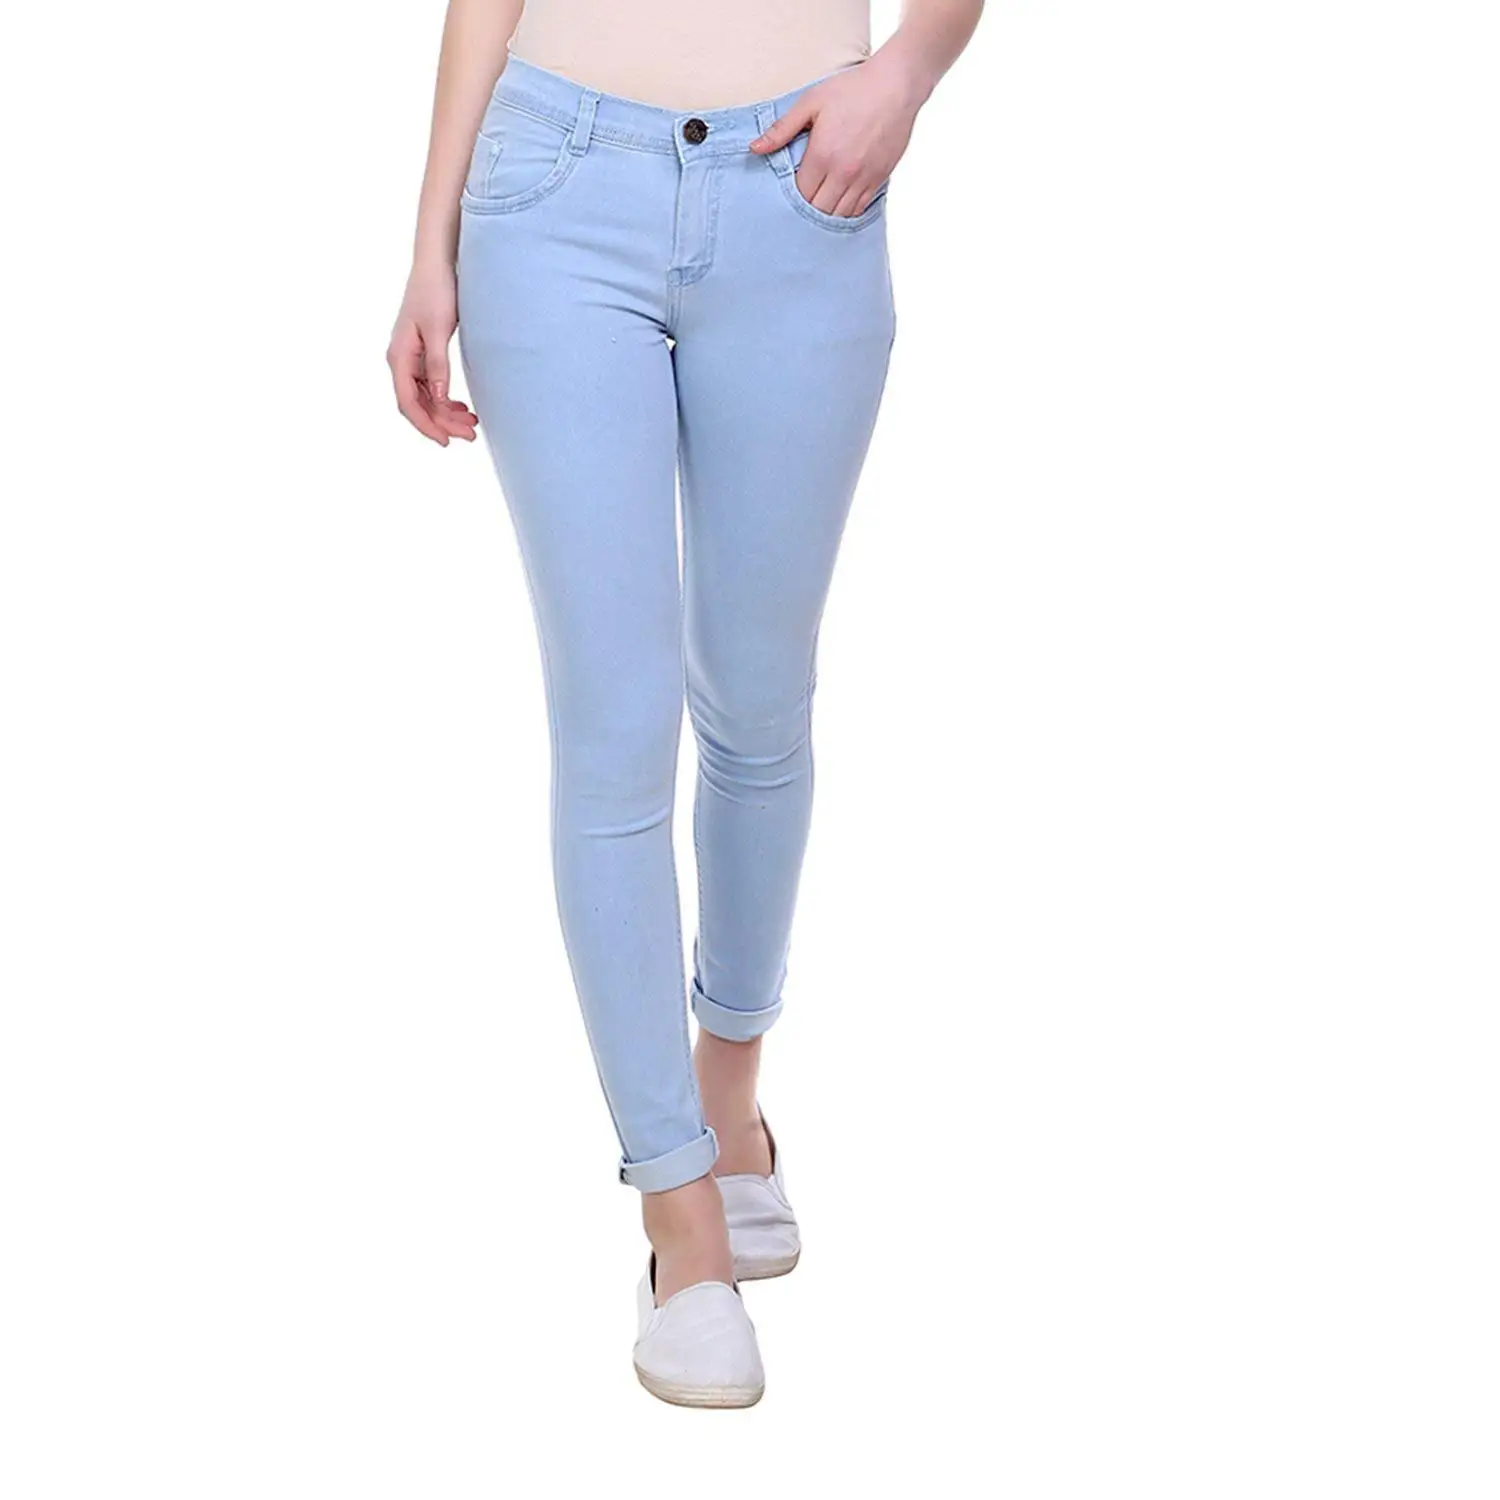 Source New Style 100% High Quality Export Oriented Custom Design Wholesale Price Denim Jeans Pant For Women's From Bangladesh on m.alibaba.com